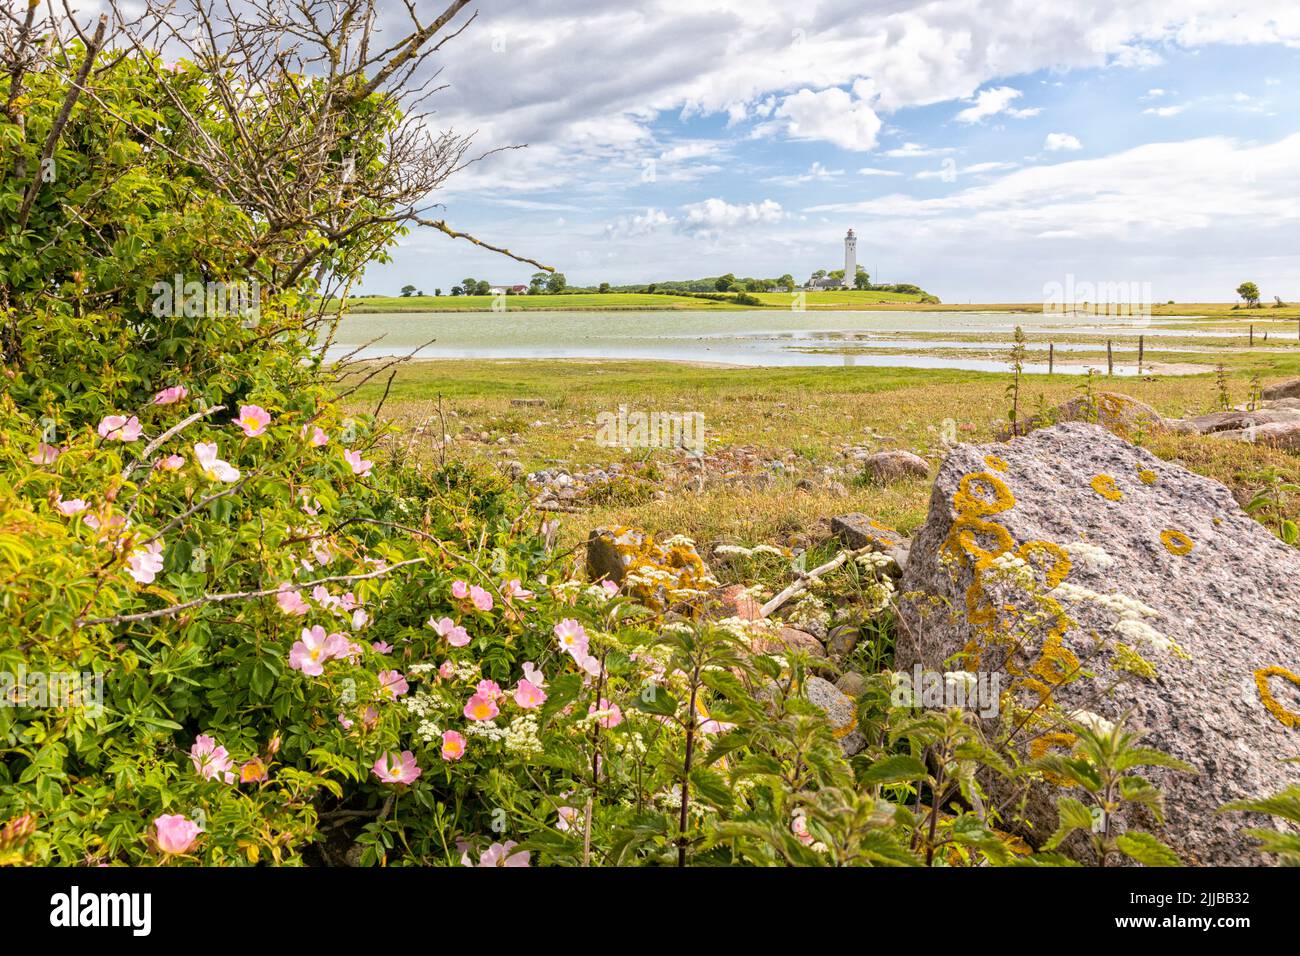 Landscape at the southern tip of Danish Baltic Sea island of Langeland with Keldsnor lake and lighthouse. Dogrose shrubs and rocks in foreground. Stock Photo